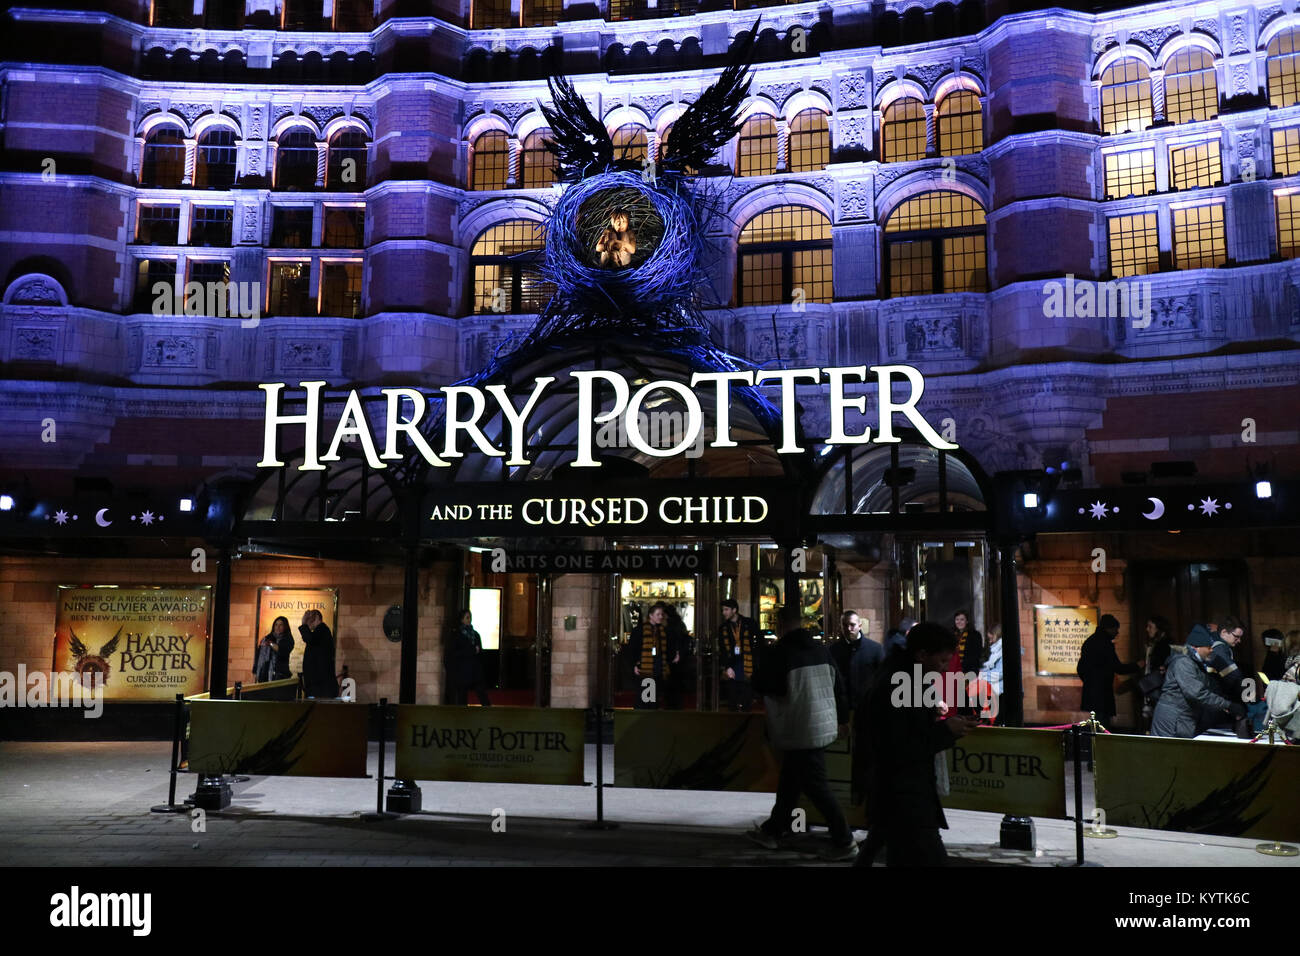 London, United Kingdom - 12/23/2017: People waiting outside to see an evening showing of Harry Potter and the Cursed Child in London, UK Stock Photo